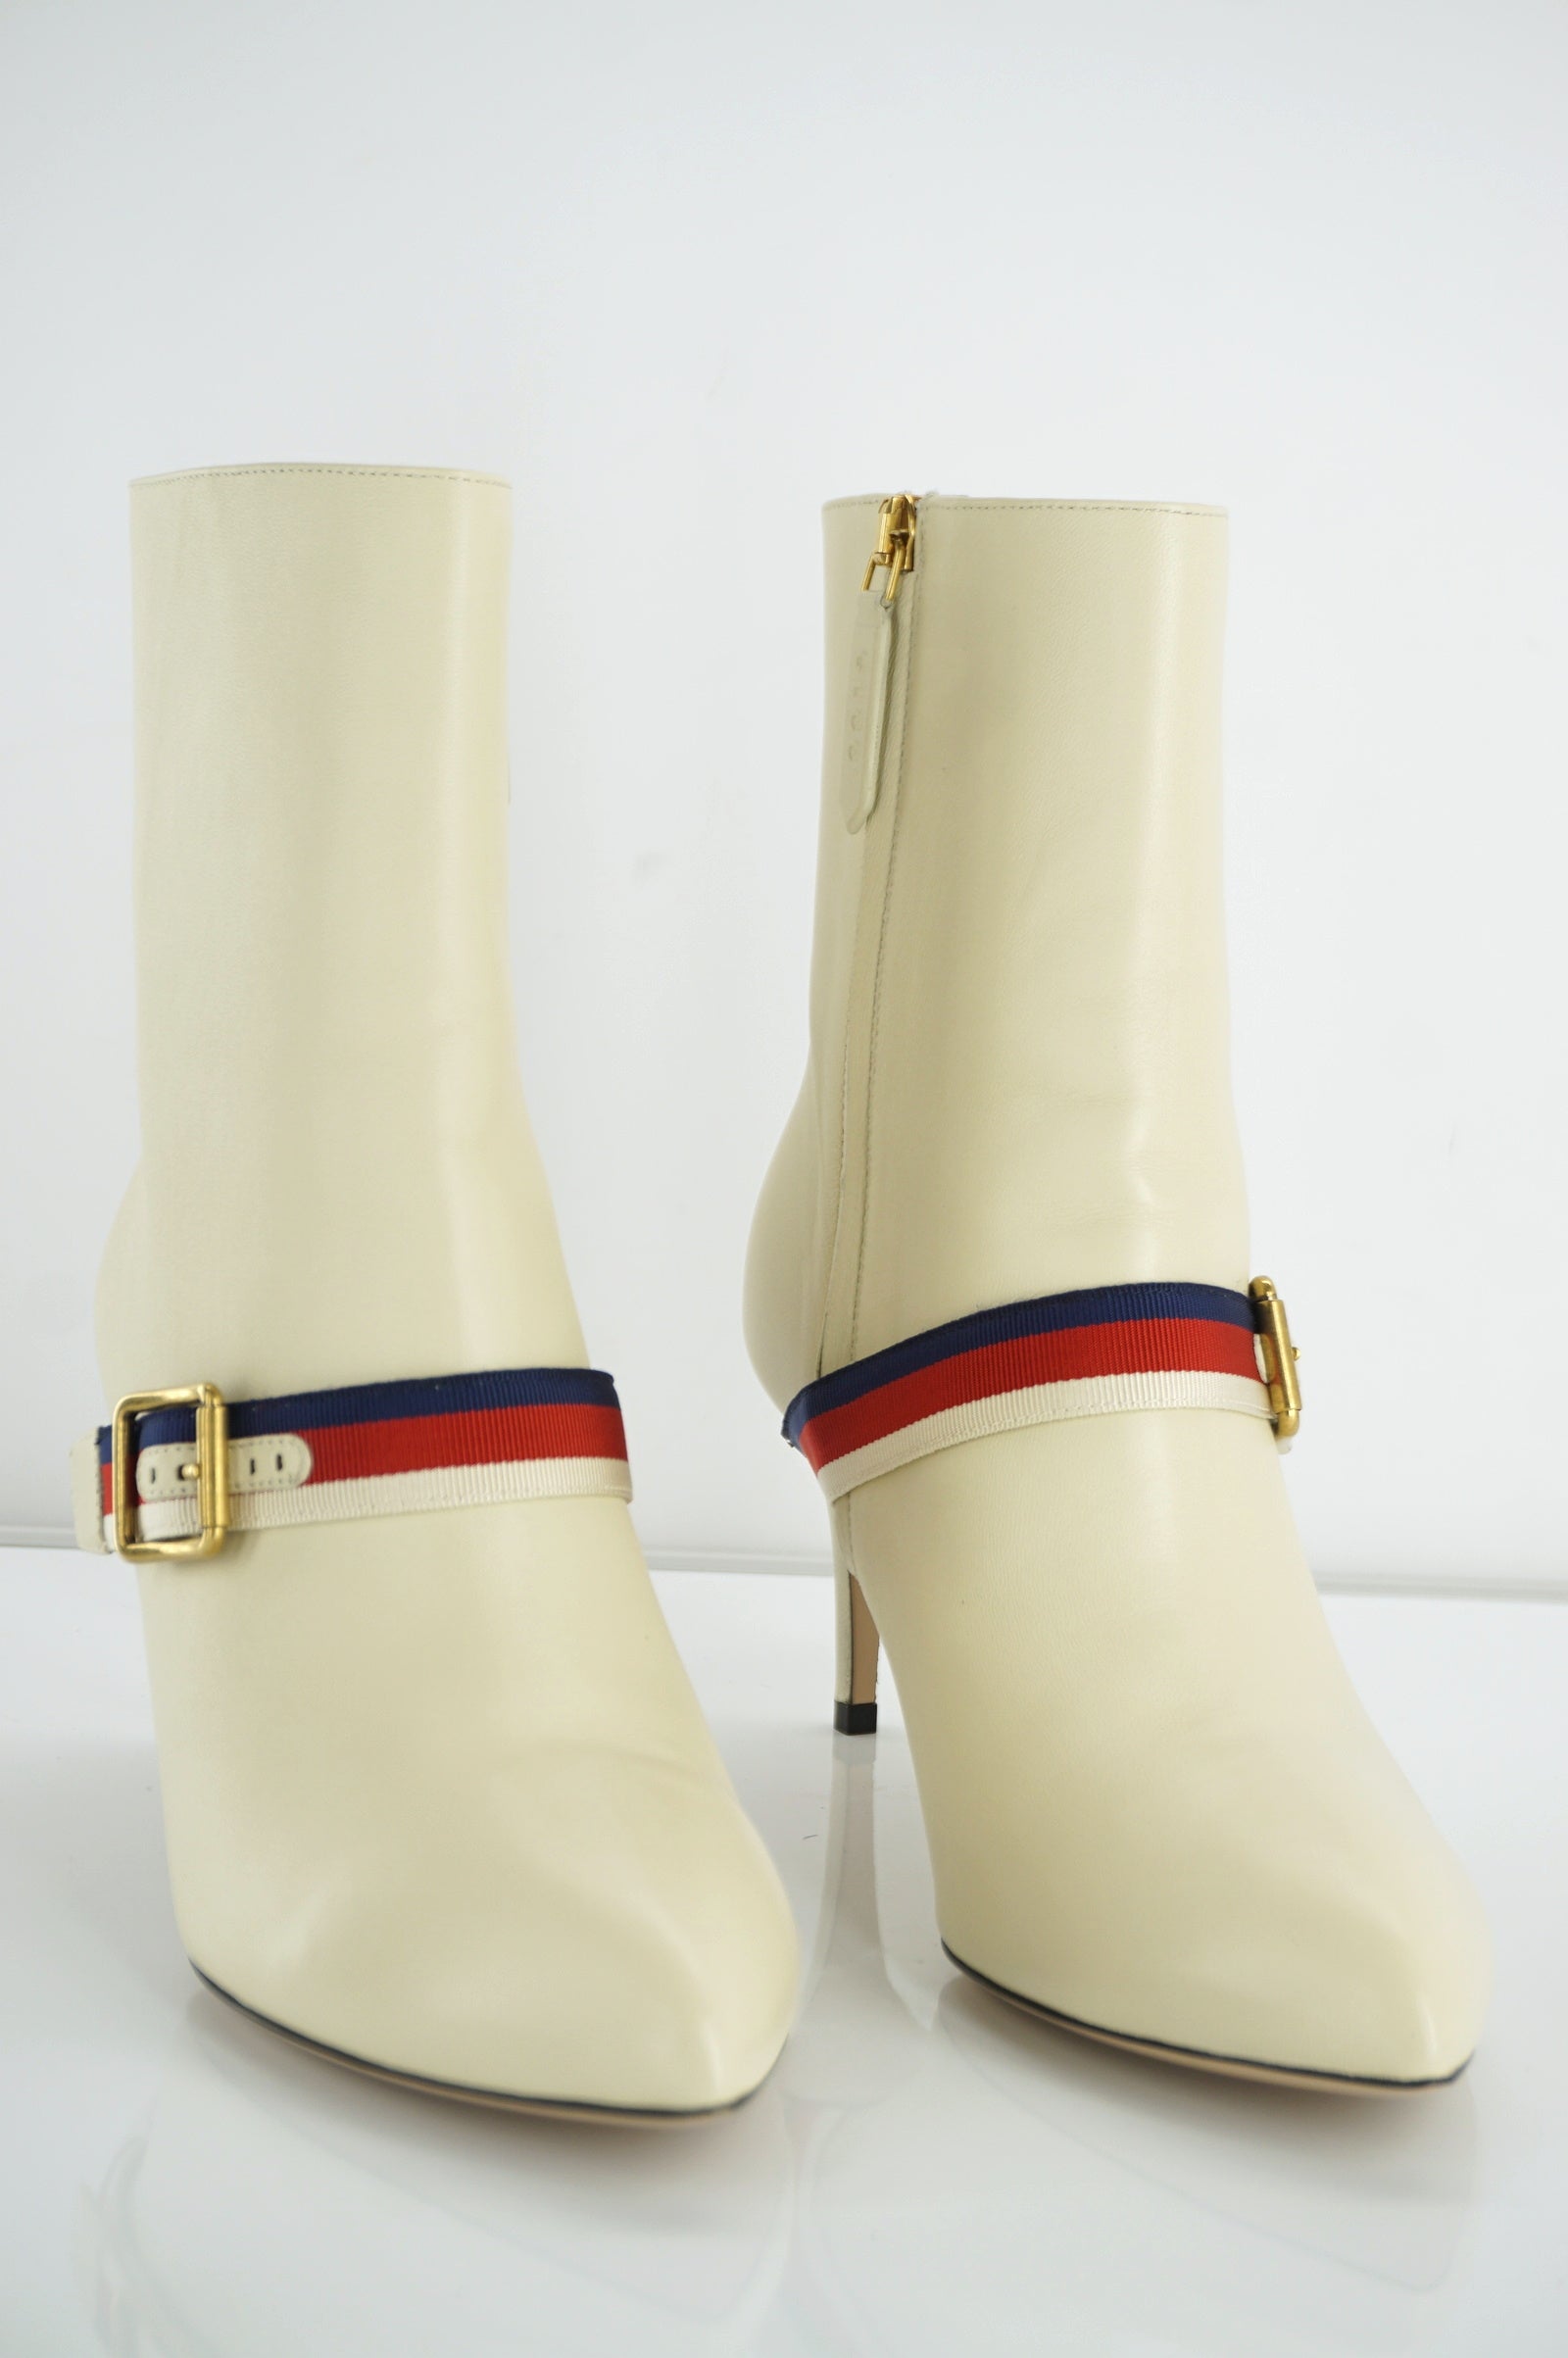 Gucci White Sylvie Leather Ankle Boots Size 37.5 Pointy Toe Web Belt $1190